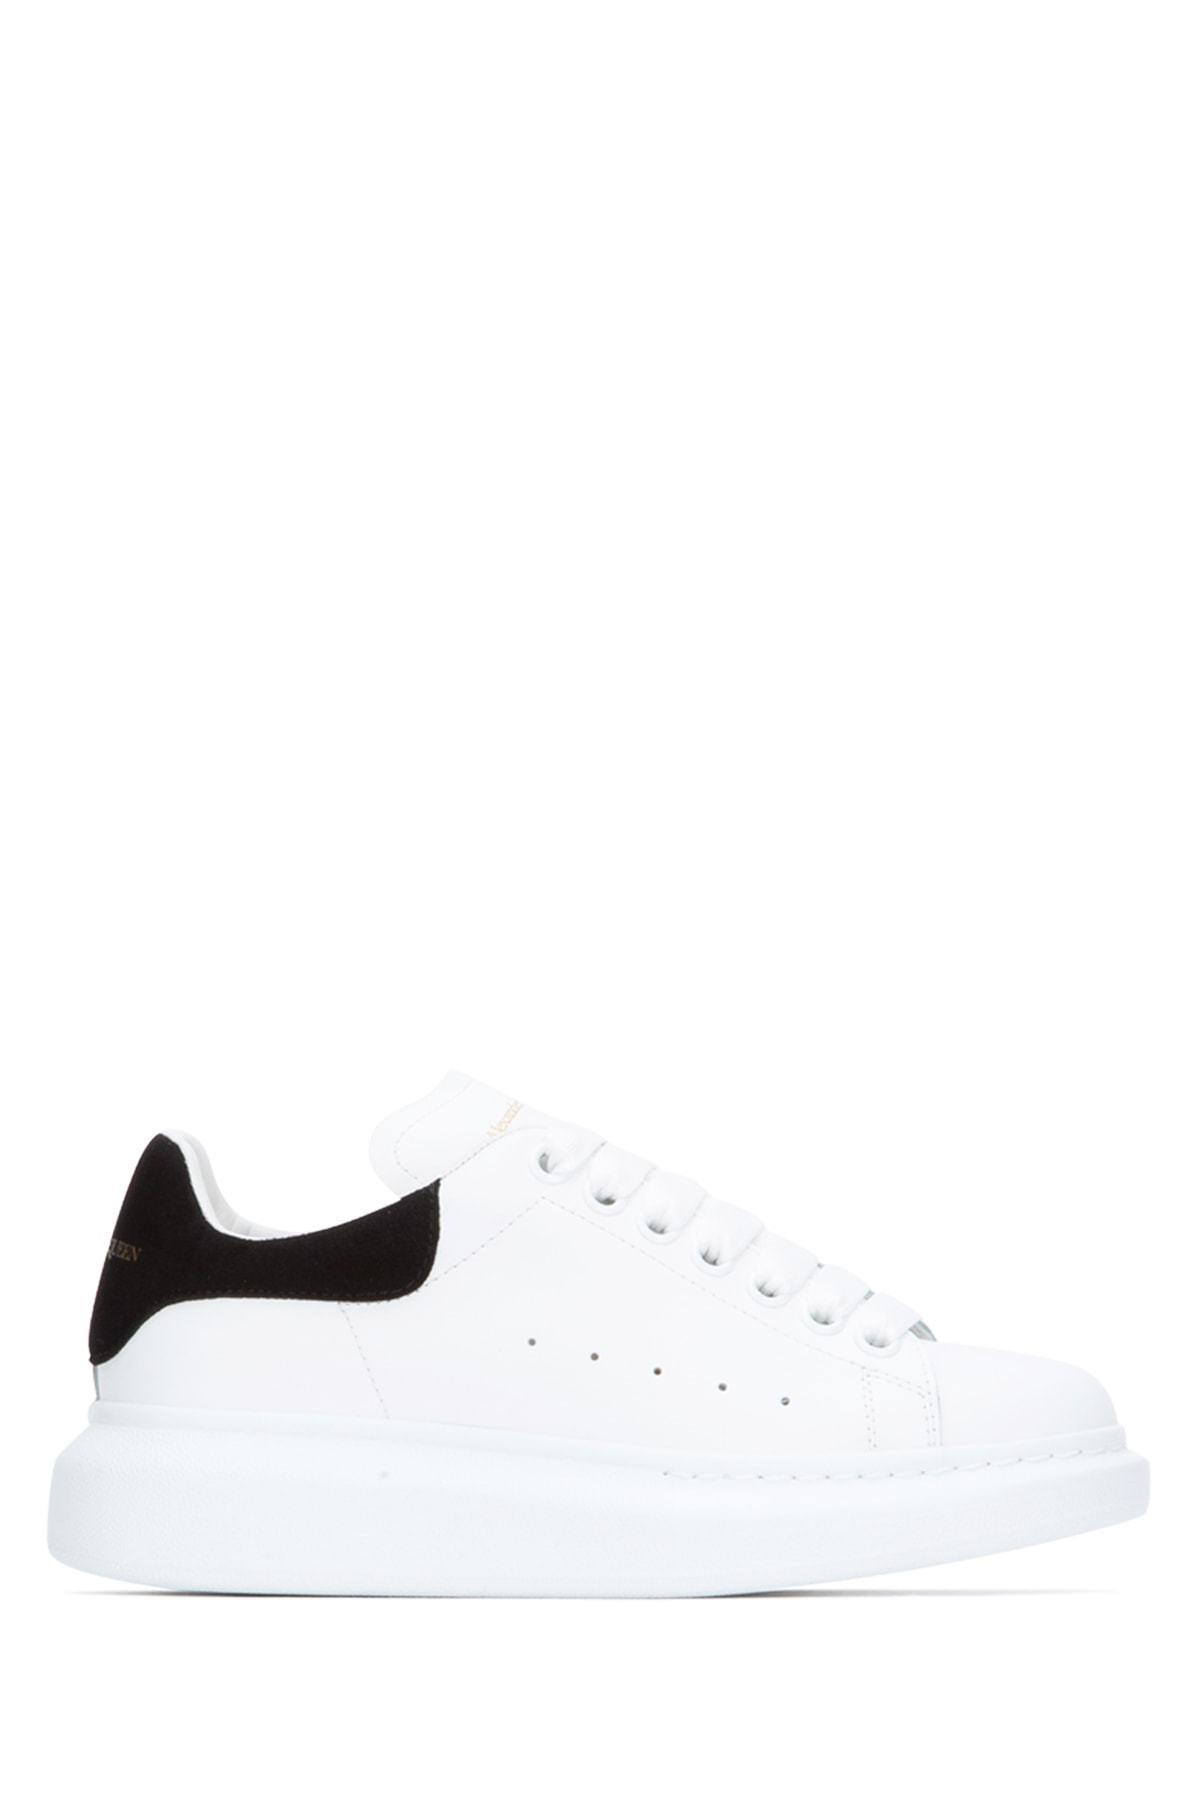 Alexander McQueen Larry White Leather Sneakers for Men - Save 92% - Lyst